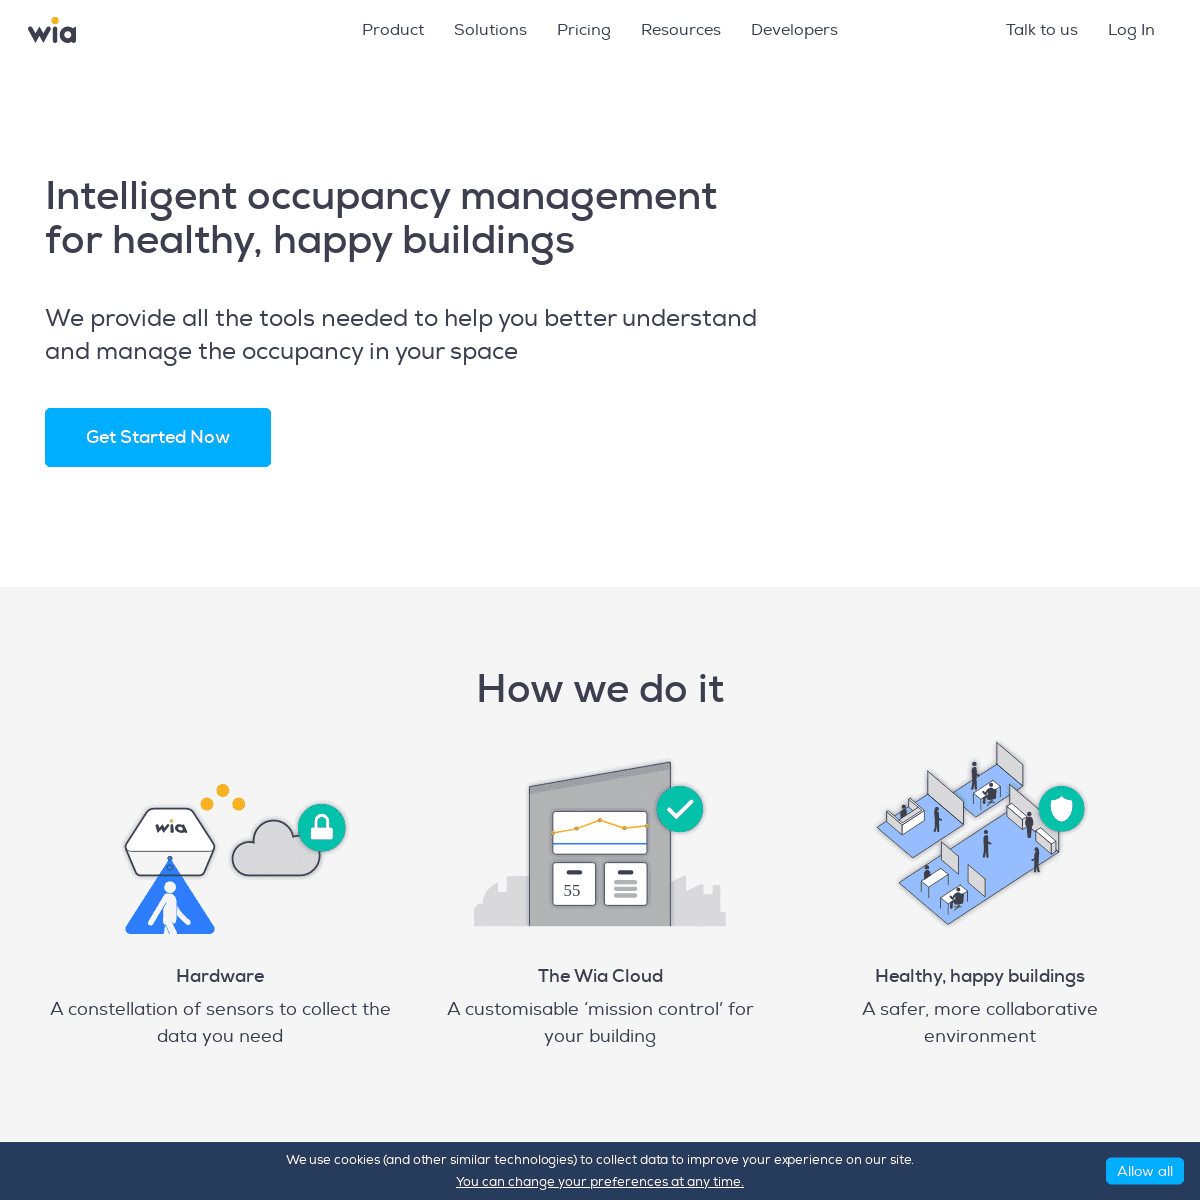 A complete backup of https://wia.io